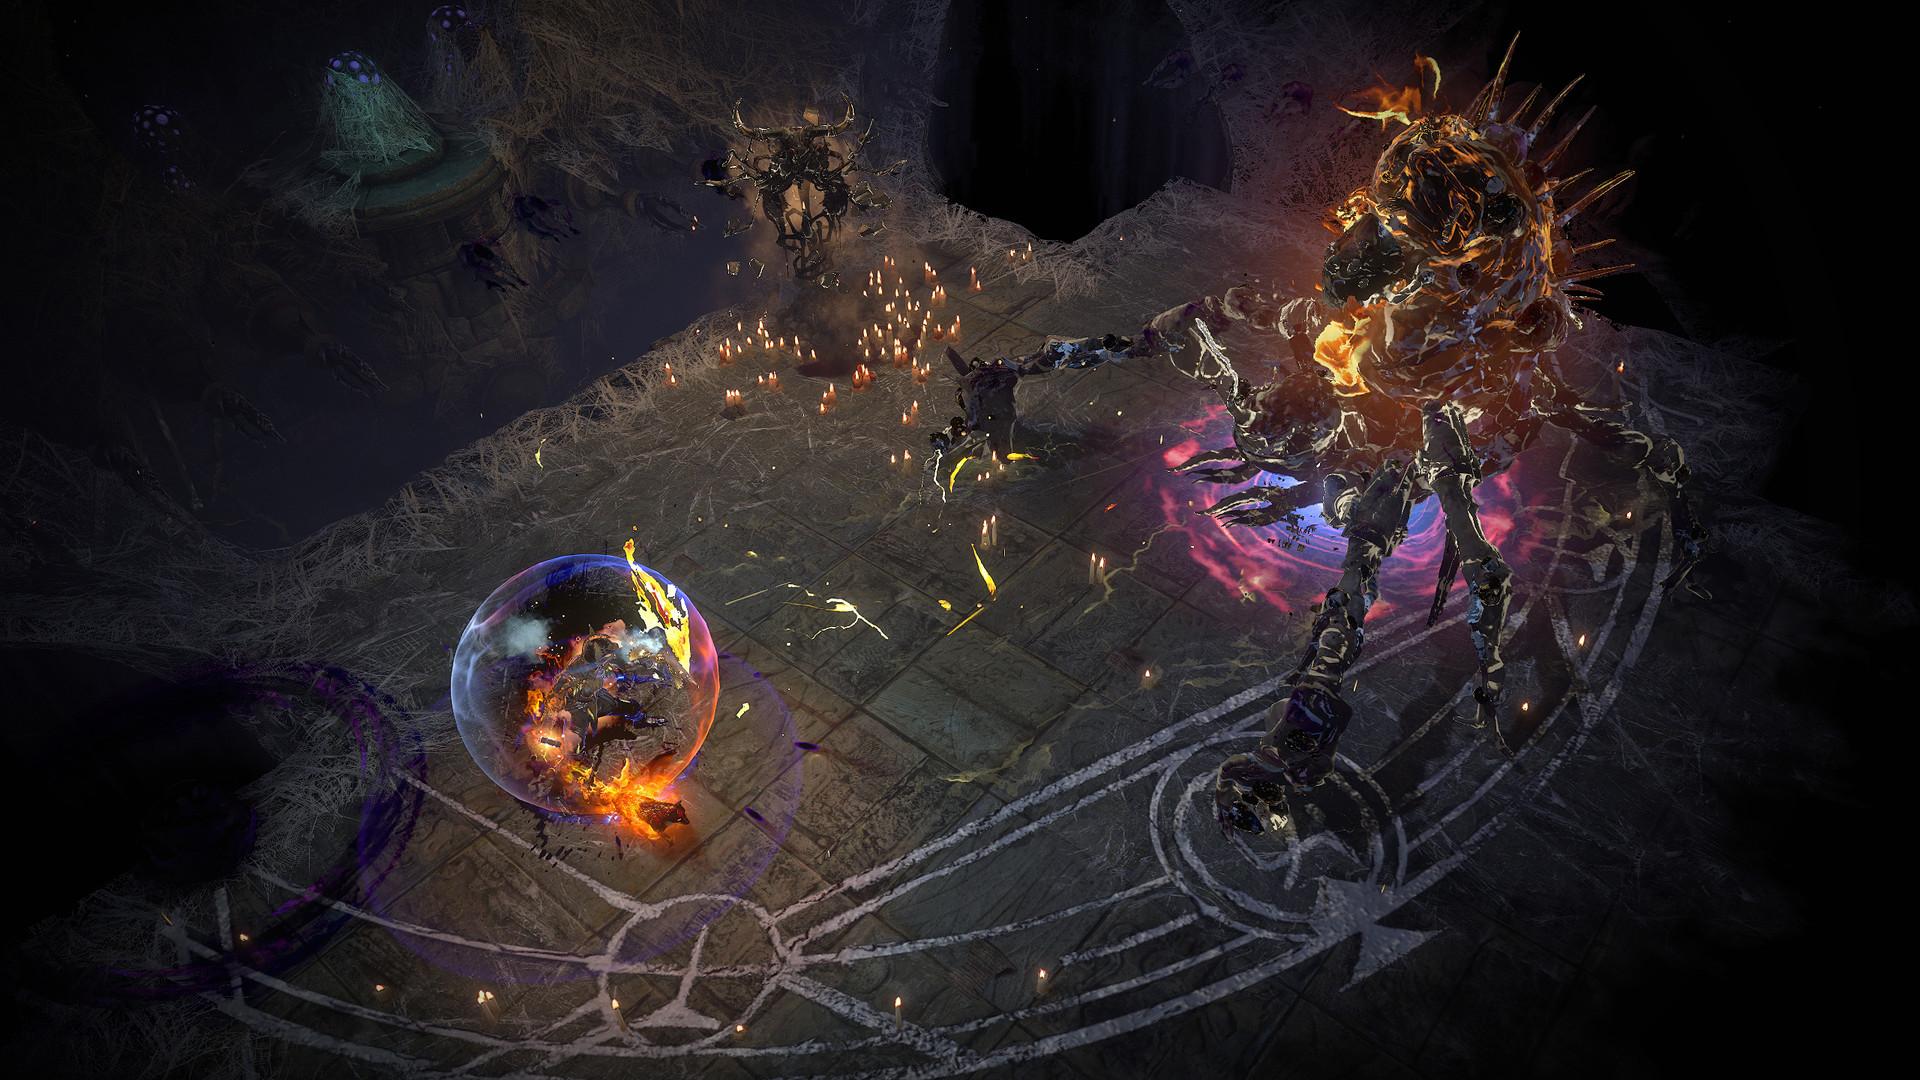 Screenshot №11 from game Path of Exile